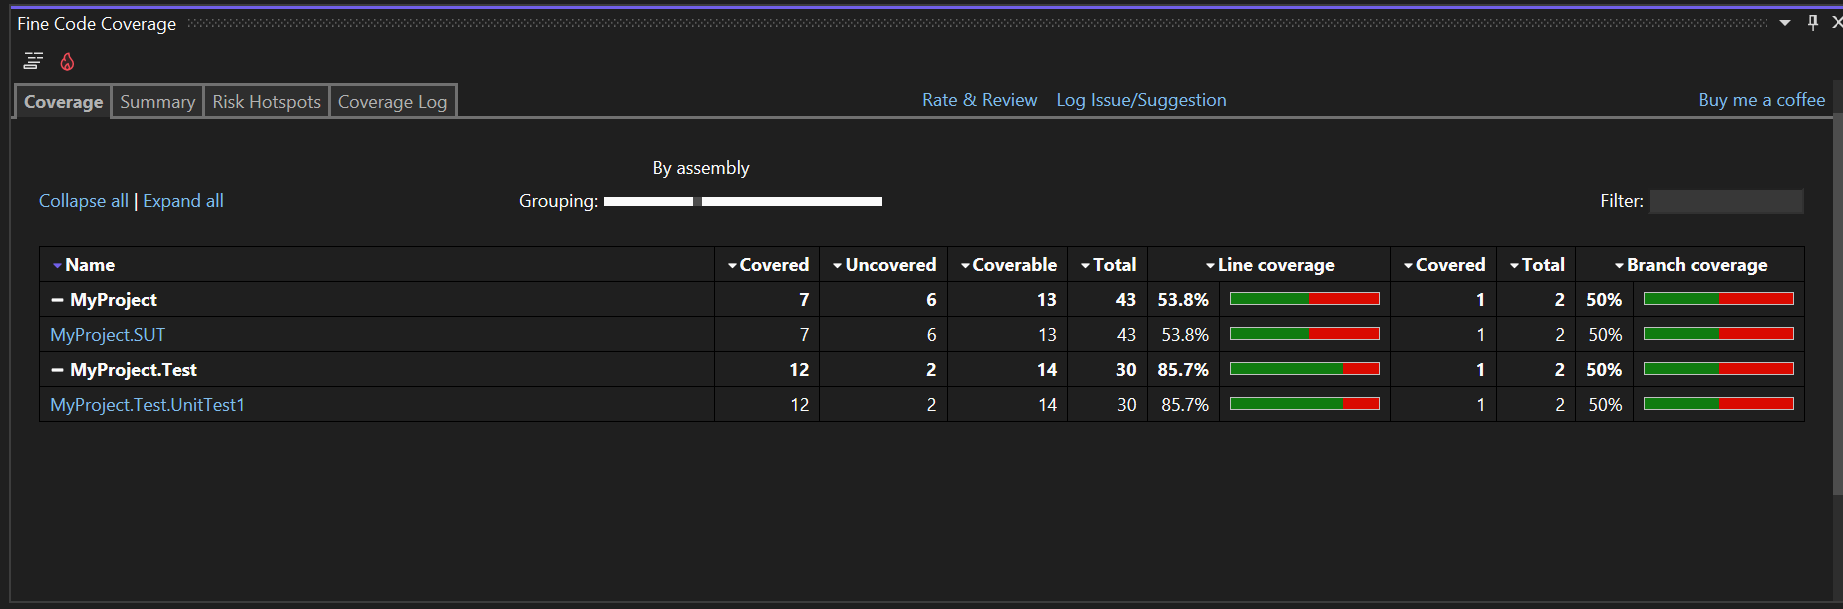 Snapshot of the Fine Code Coverage output window